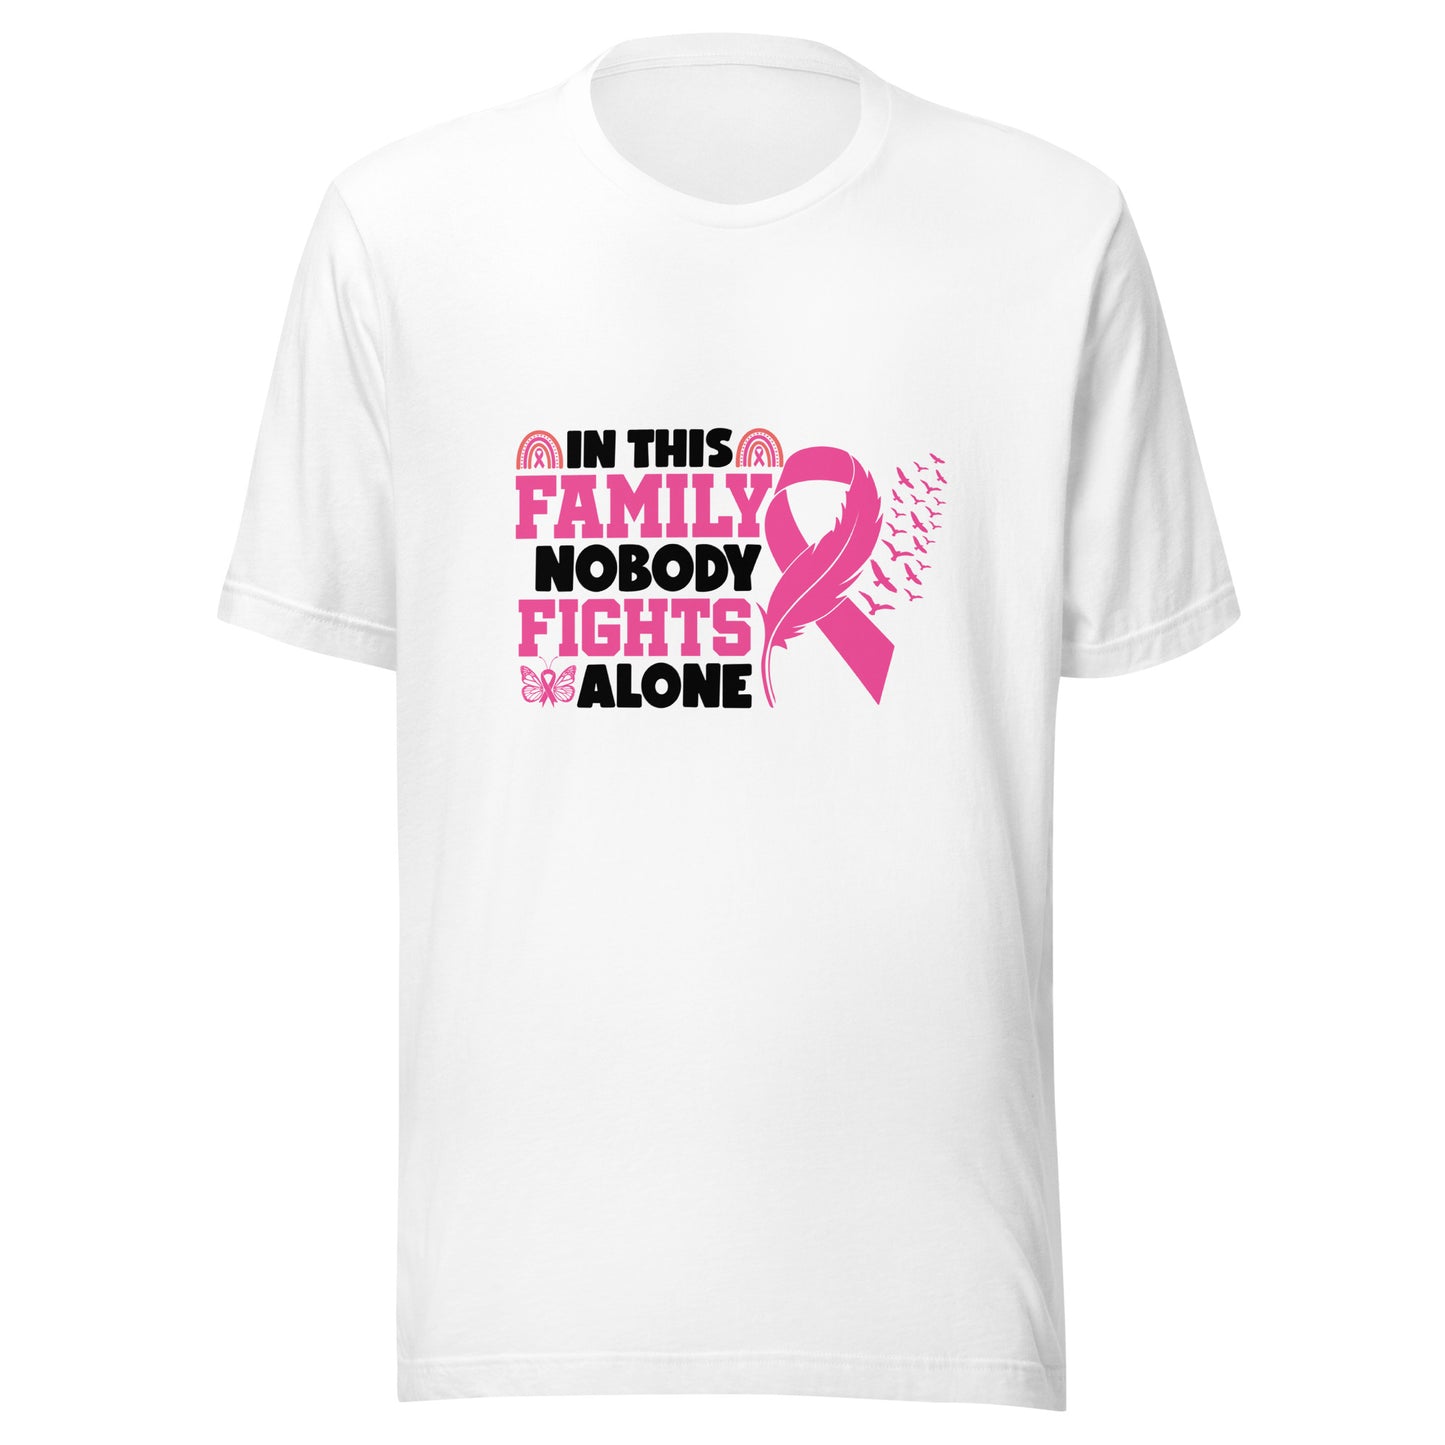 In This Family Nobody Fights Alone Breast Cancer Awareness Pink Cancer Ribbon Support Unisex T-shirt